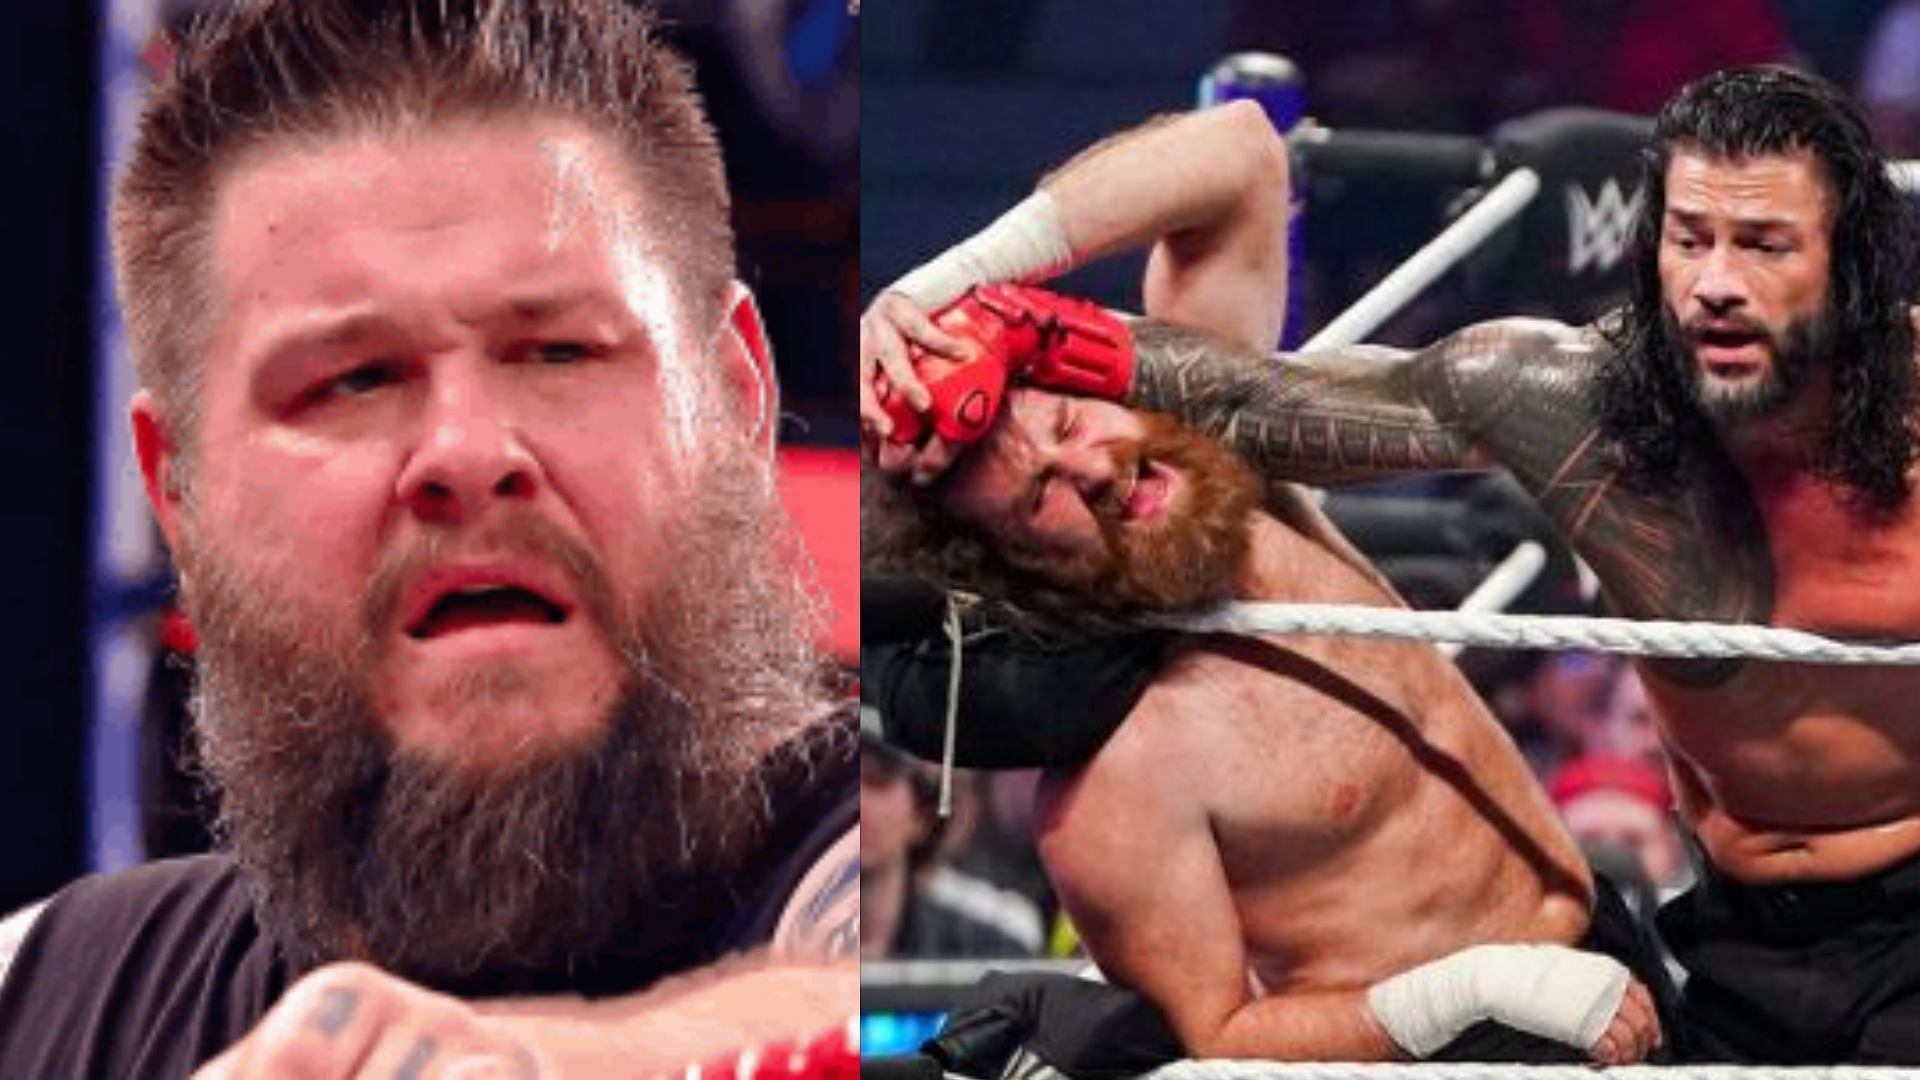 Kevin Owens and Sami Zayn may get together on the Road to WrestleMania 39 to take down The Bloodline